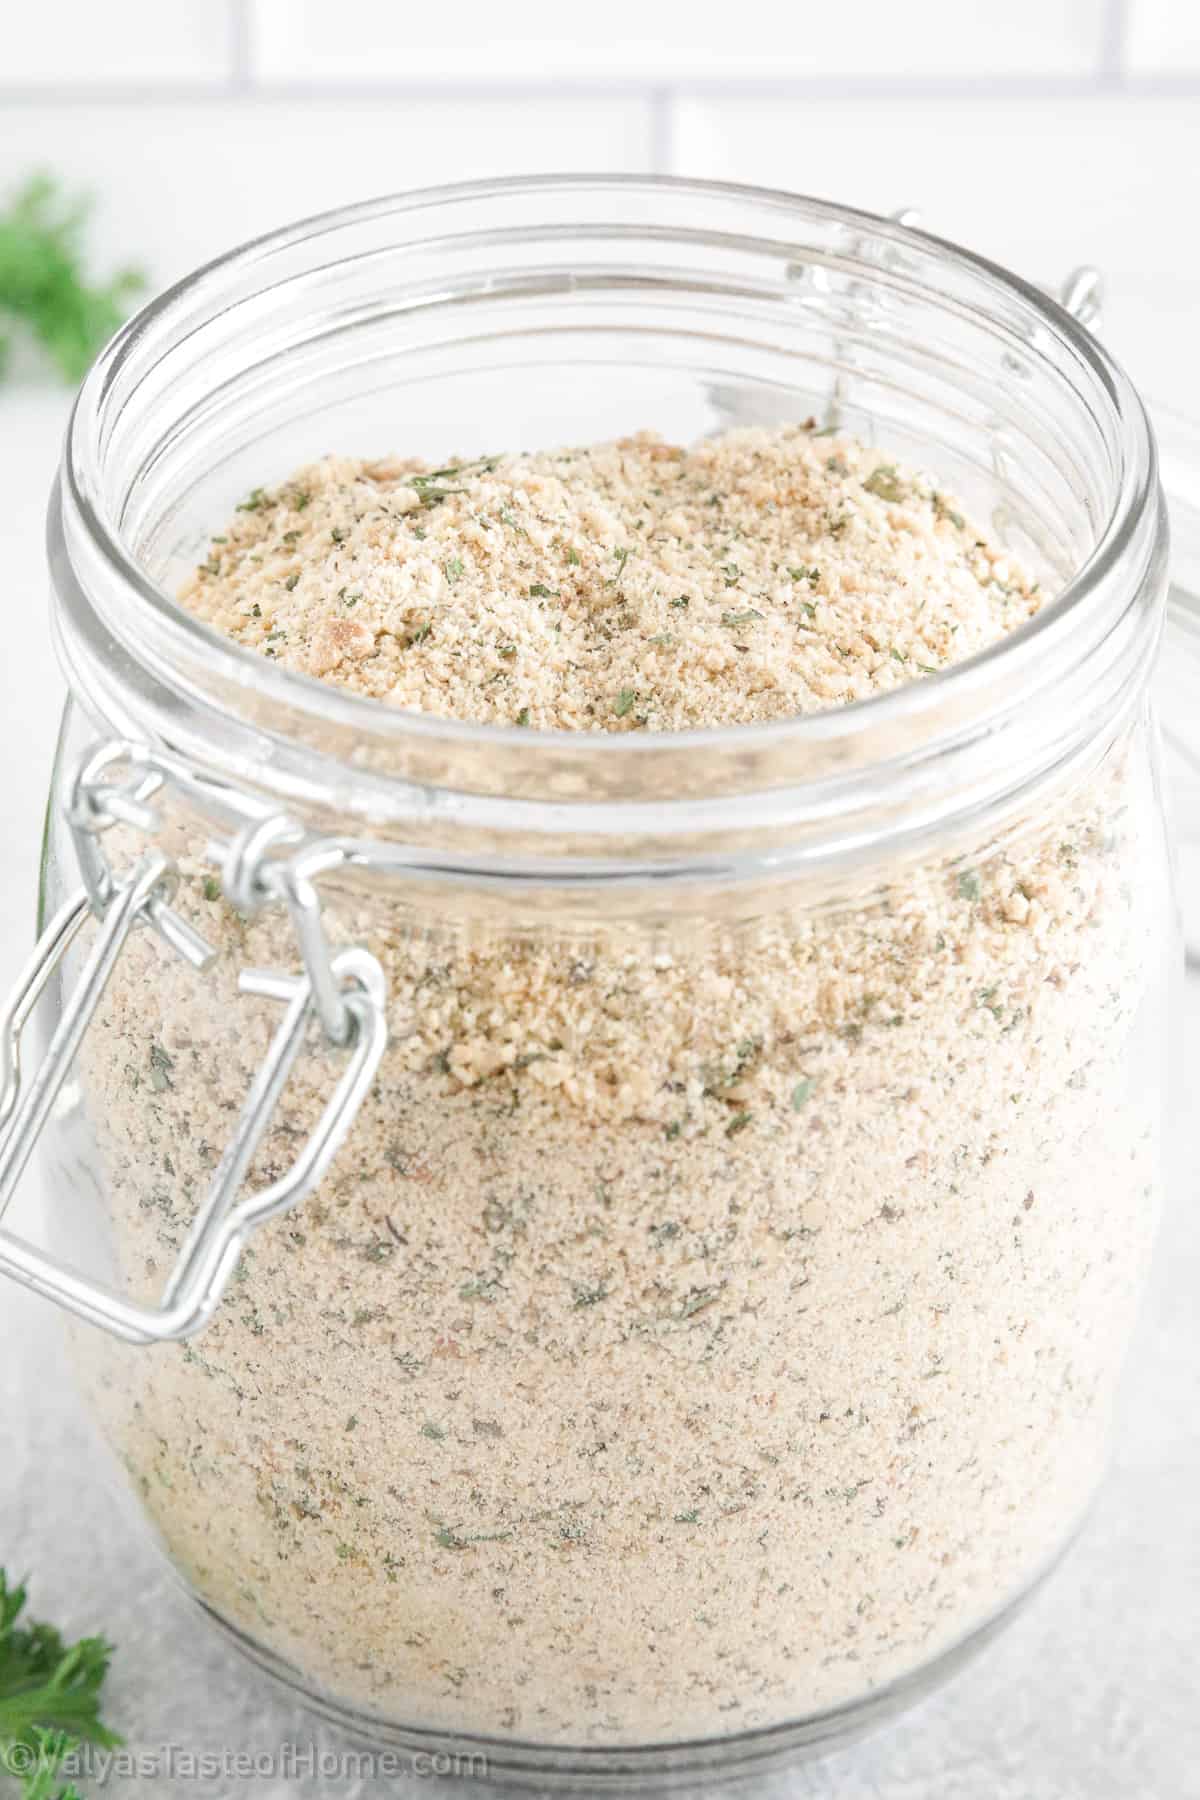 The breadcrumbs you make at home are not only healthier, but they also taste better than the store-bought variety.